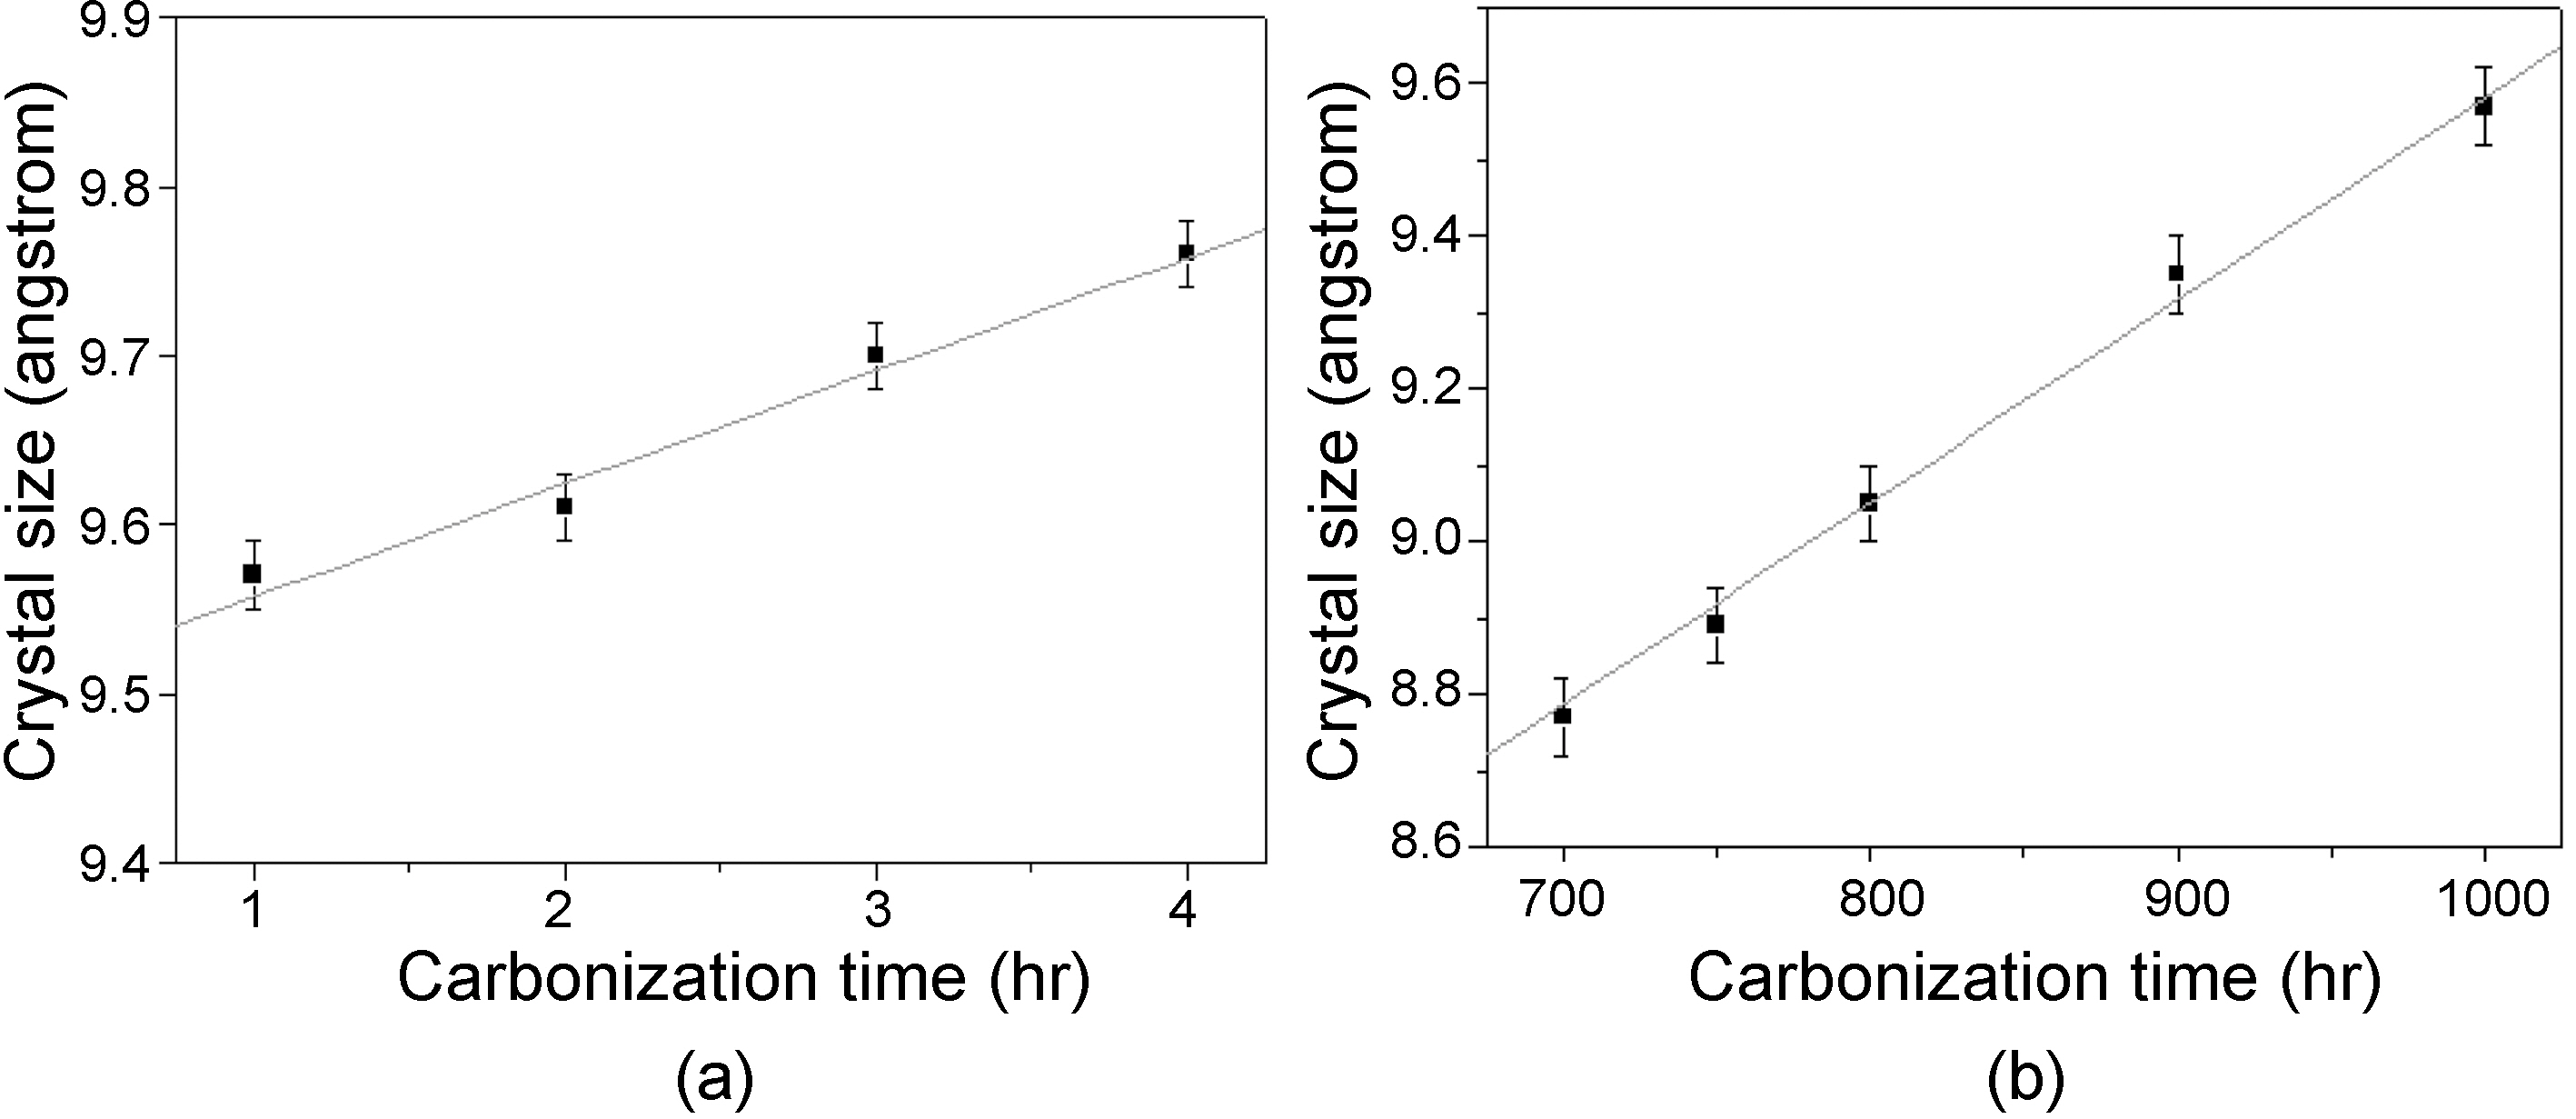 Crystalline size (Lc) of carbon fibers carbonized at different (a) temperature and (b) time.